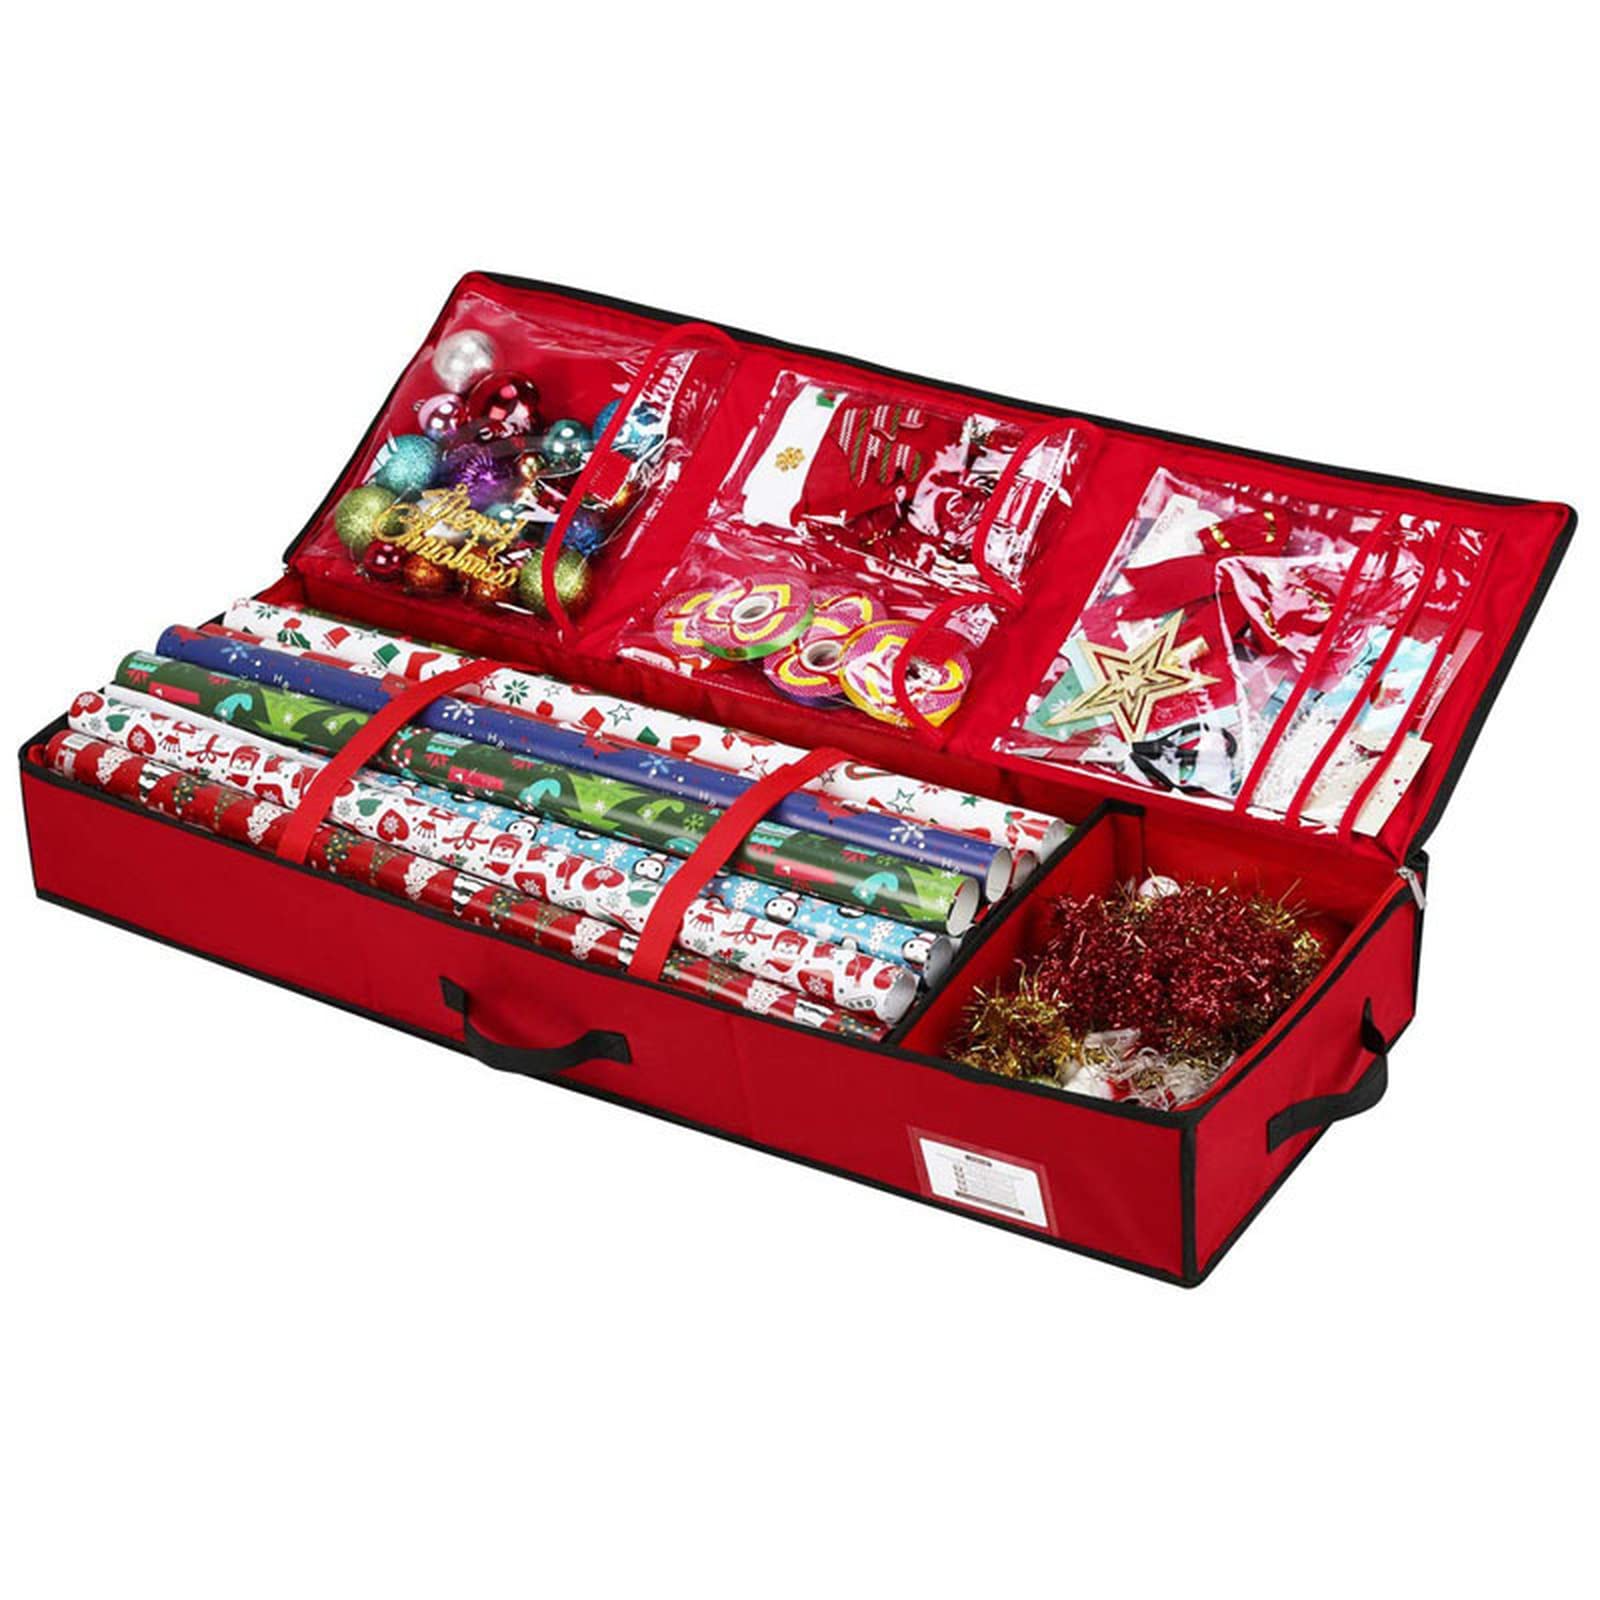 Red Christmas Gift Decorative Wrapping Paper Storage Box Foldable Under Bed Gift Storage Bag With Lid